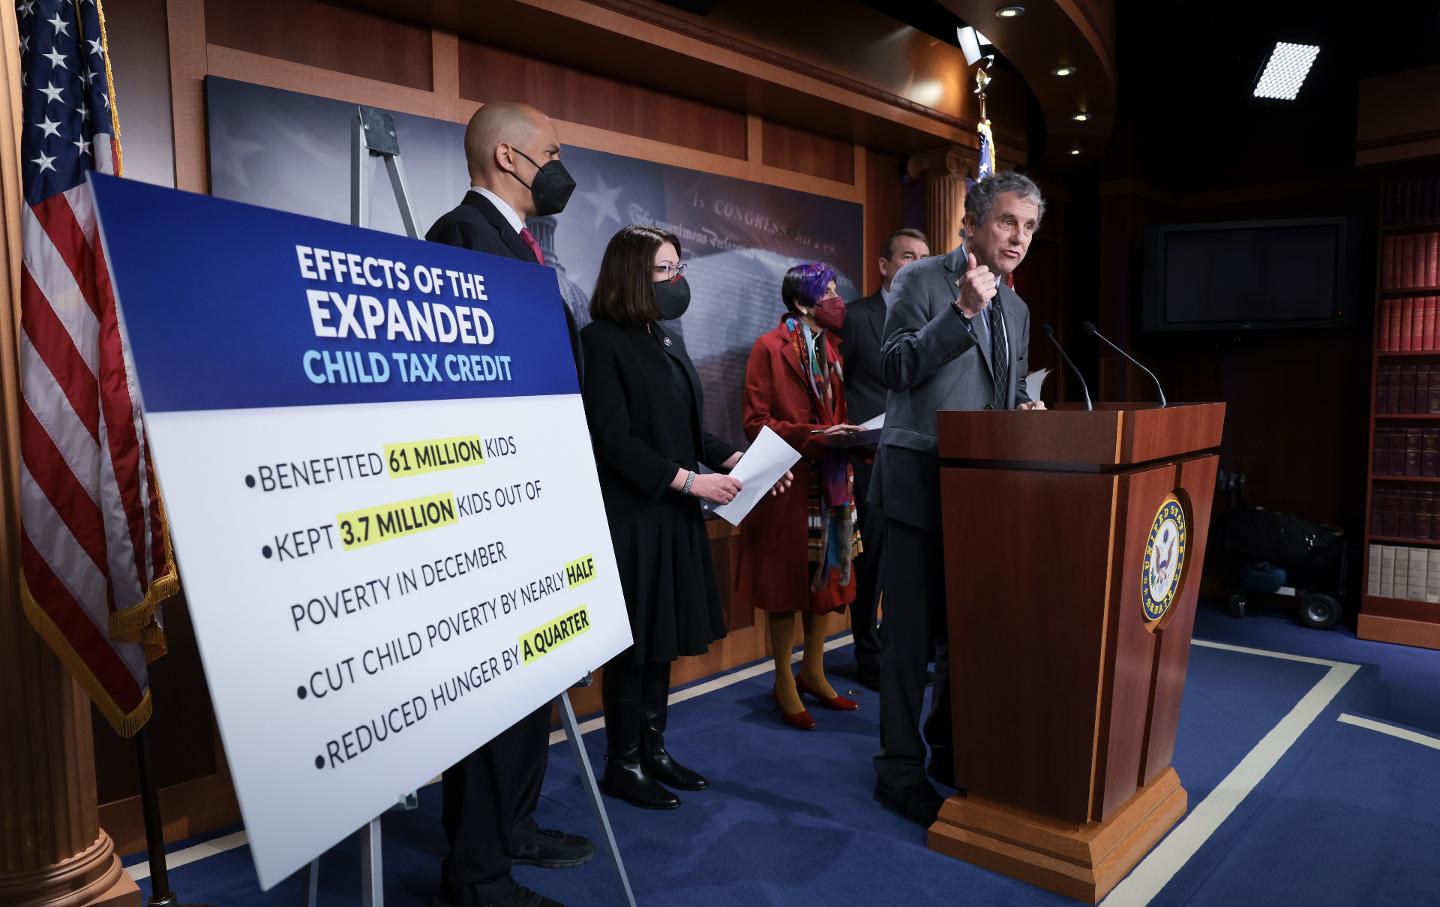 Senator Sherrod Brown (right) (D-Ohio) speaks during a press conference about the child tax credit on February 8, 2022.